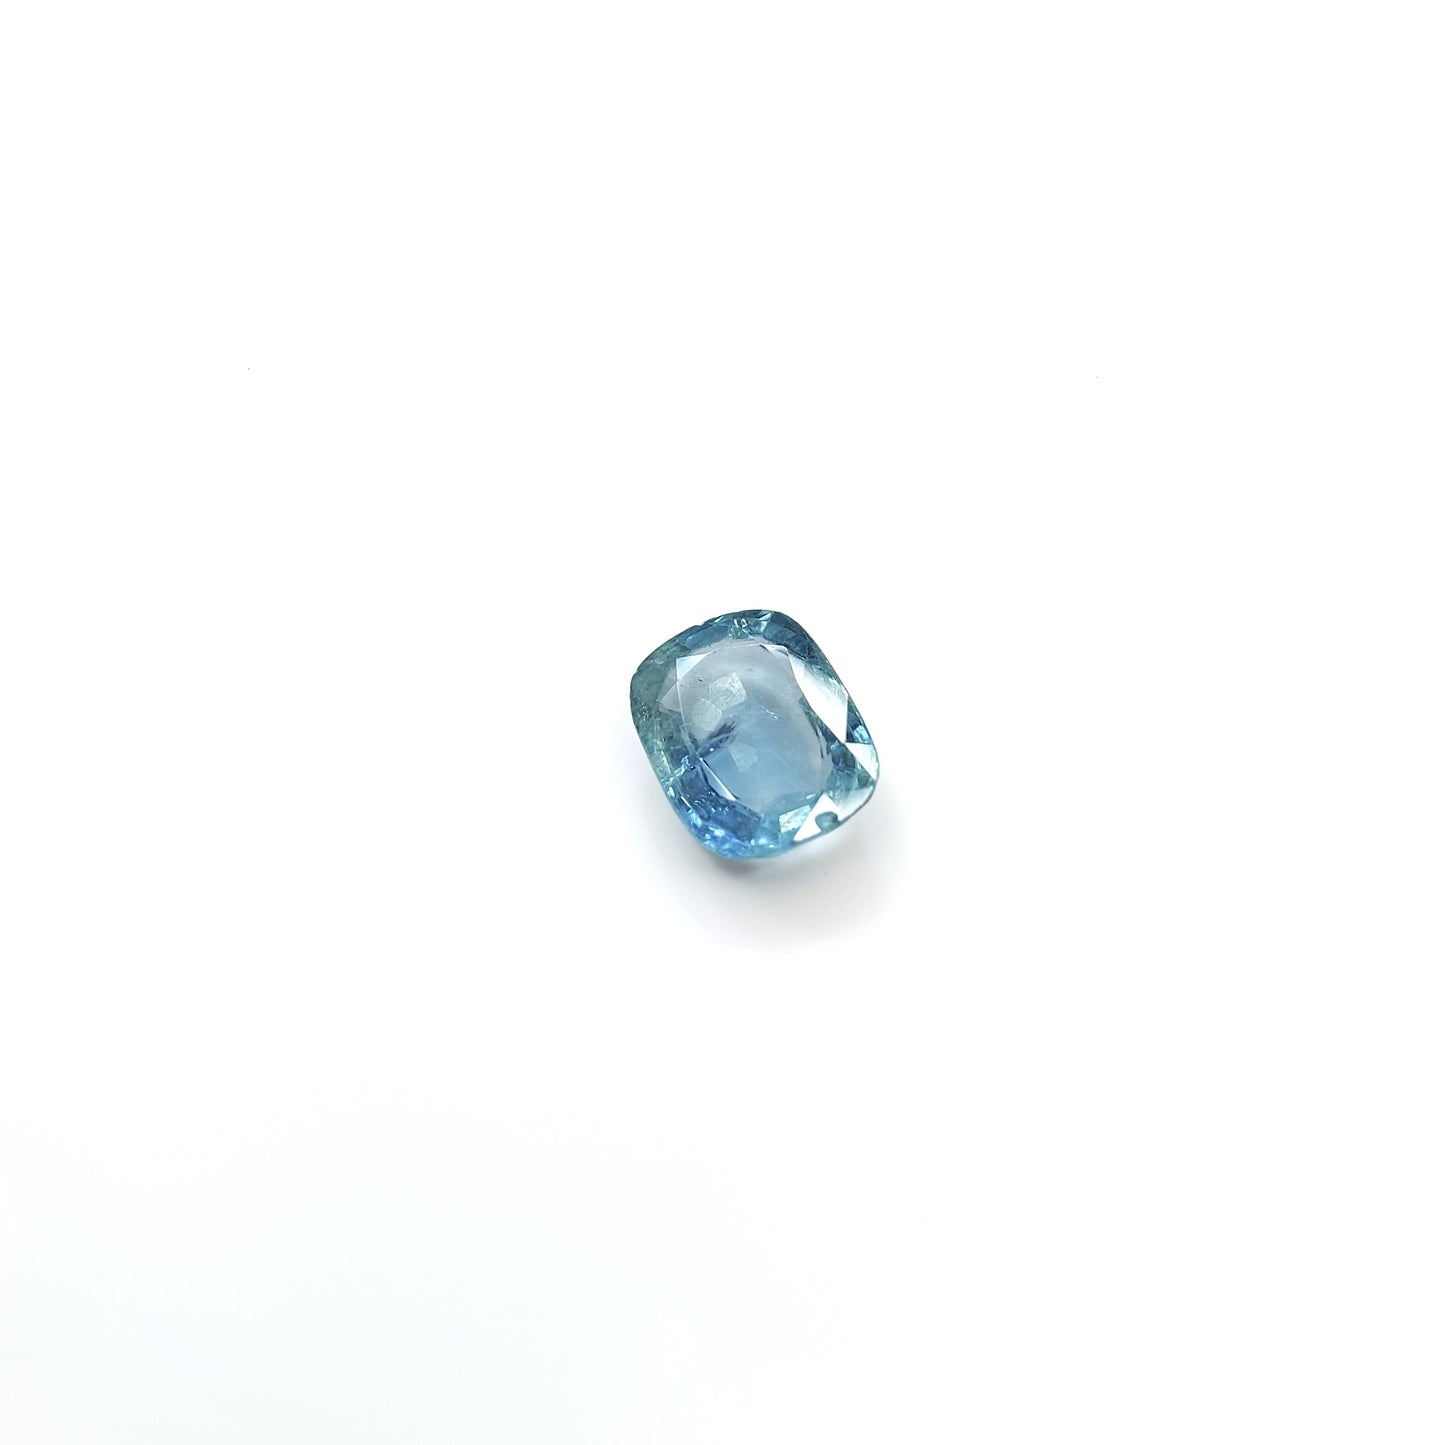 100% Natural Unheated Blue sapphire | 9.44cts